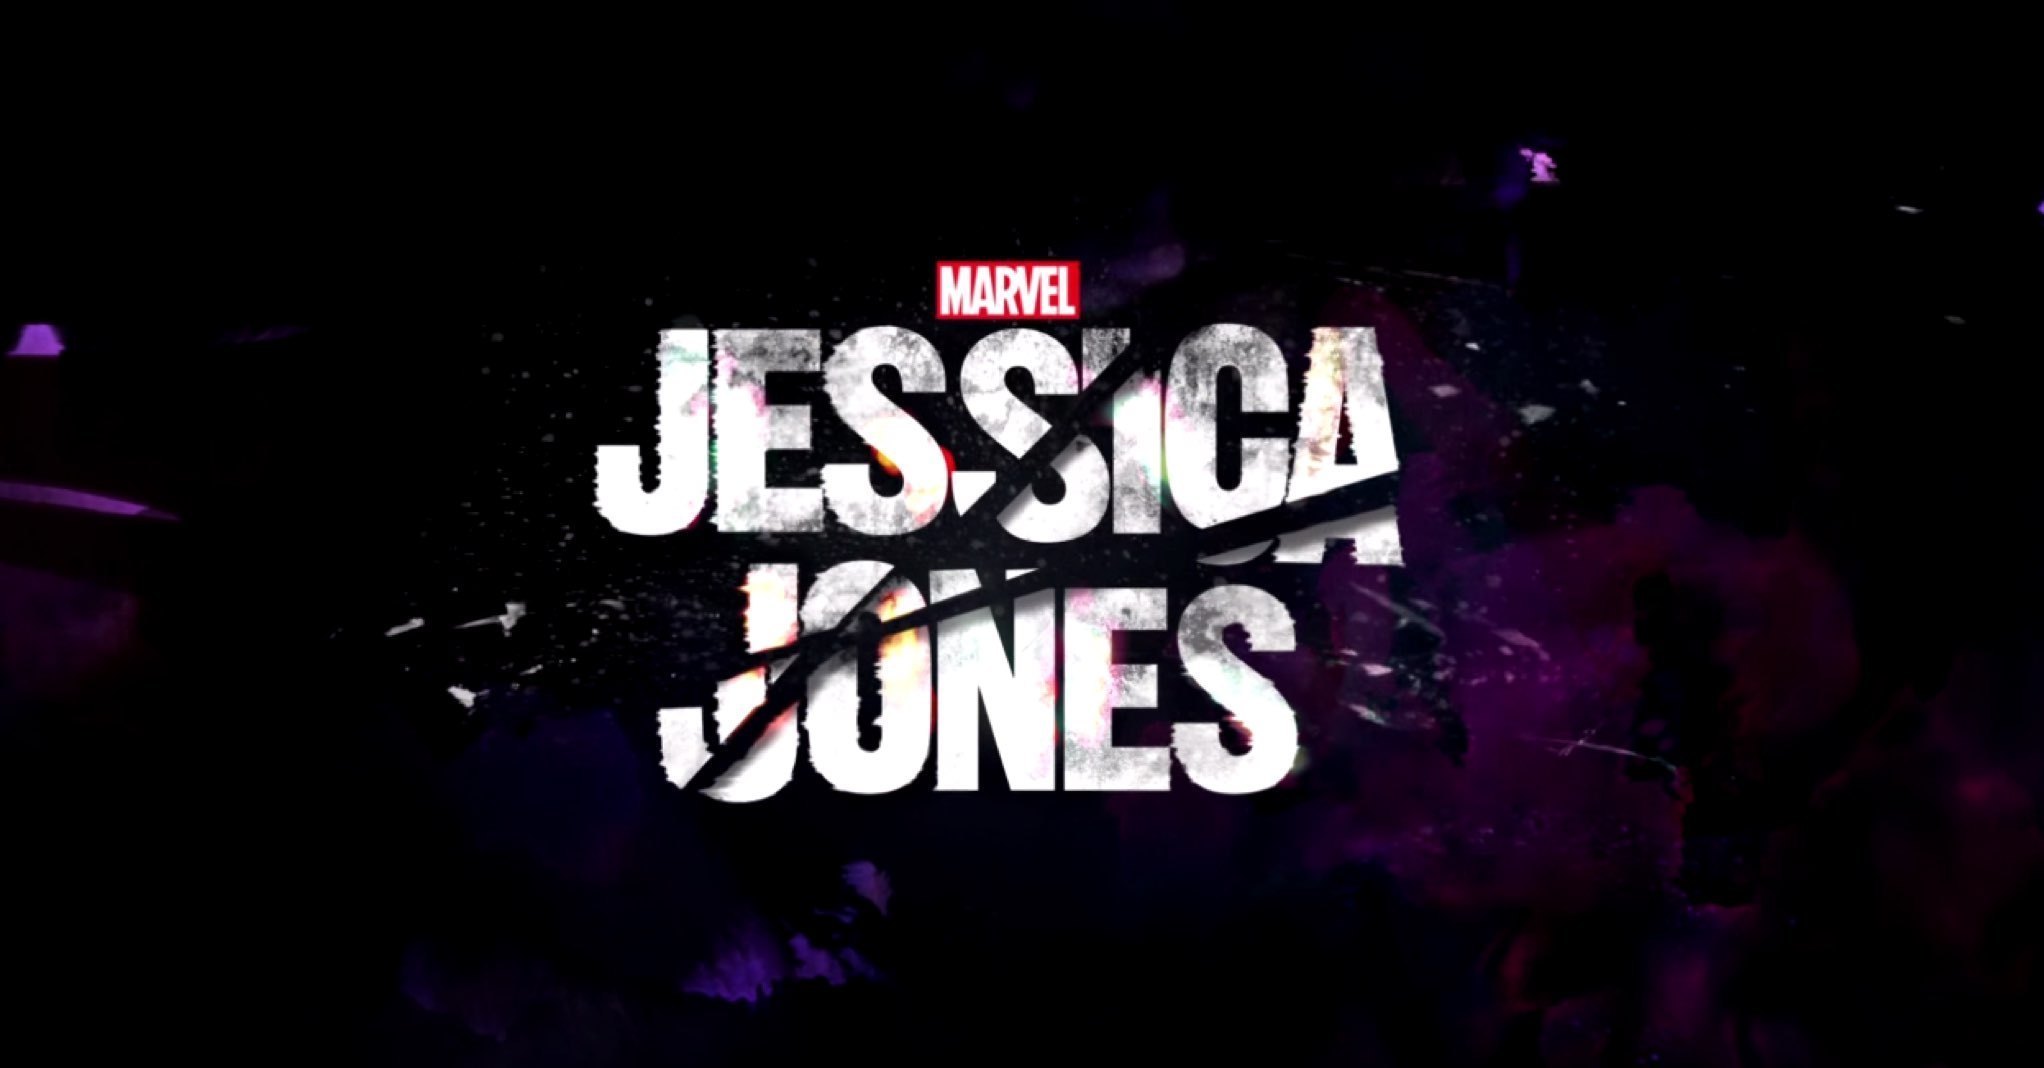 Marvel gives Jessica Jones a release date and her first teaser trailer